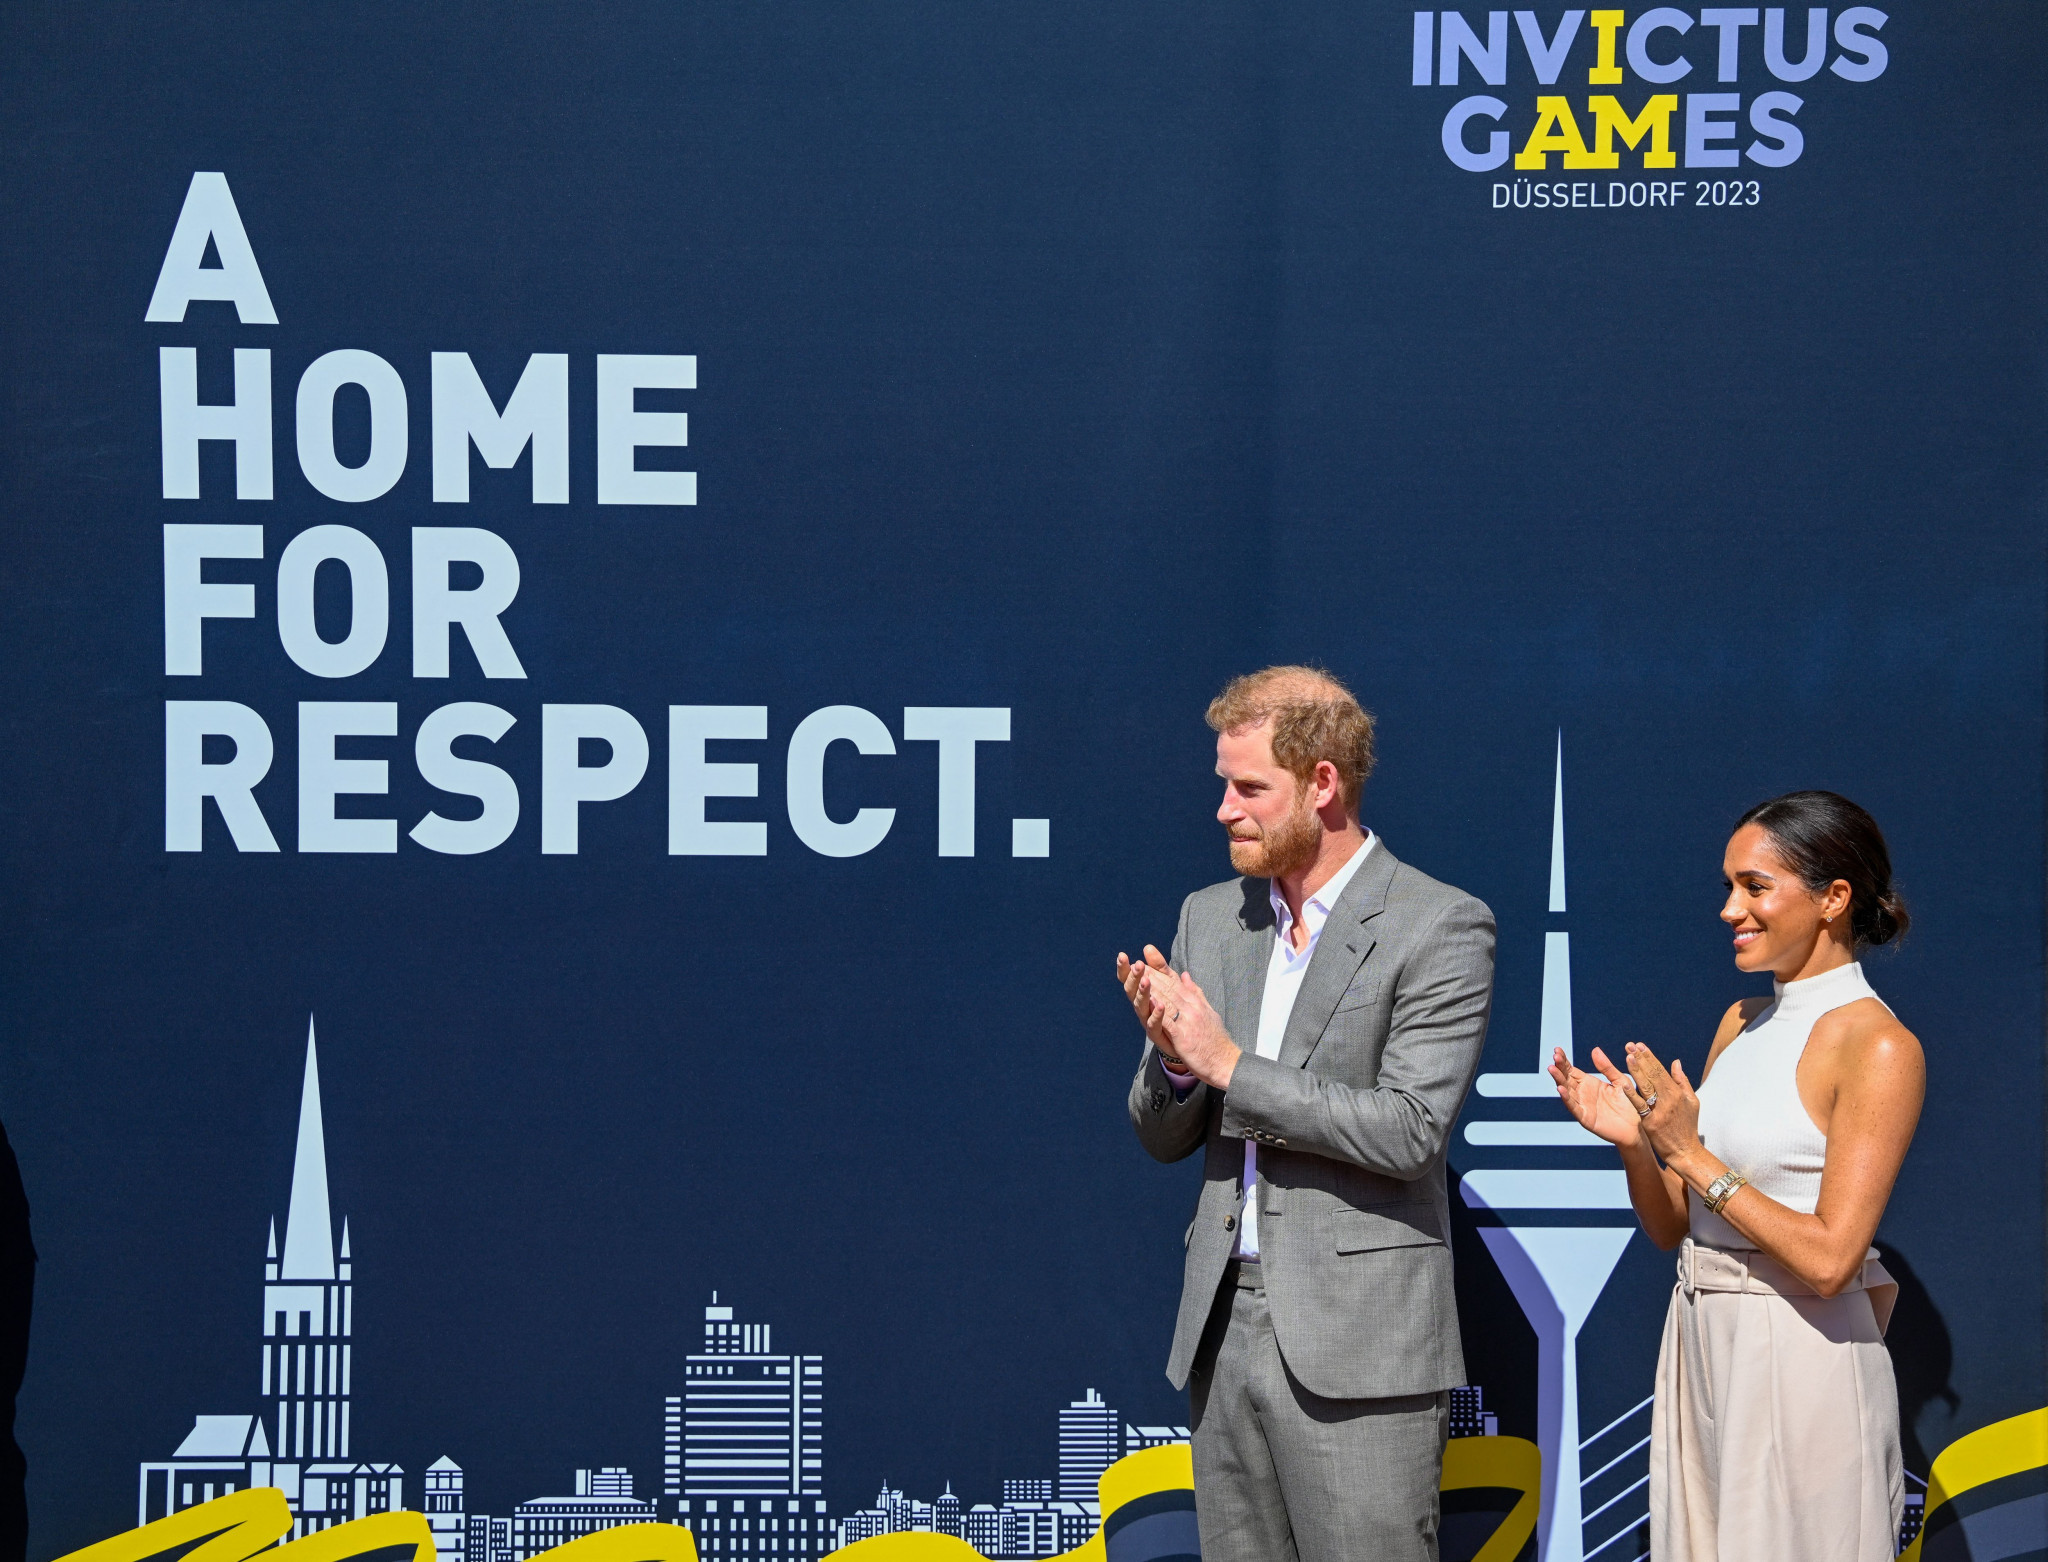 Prince Harry helps unveil motto for 2023 Invictus Games in Düsseldorf with year to go